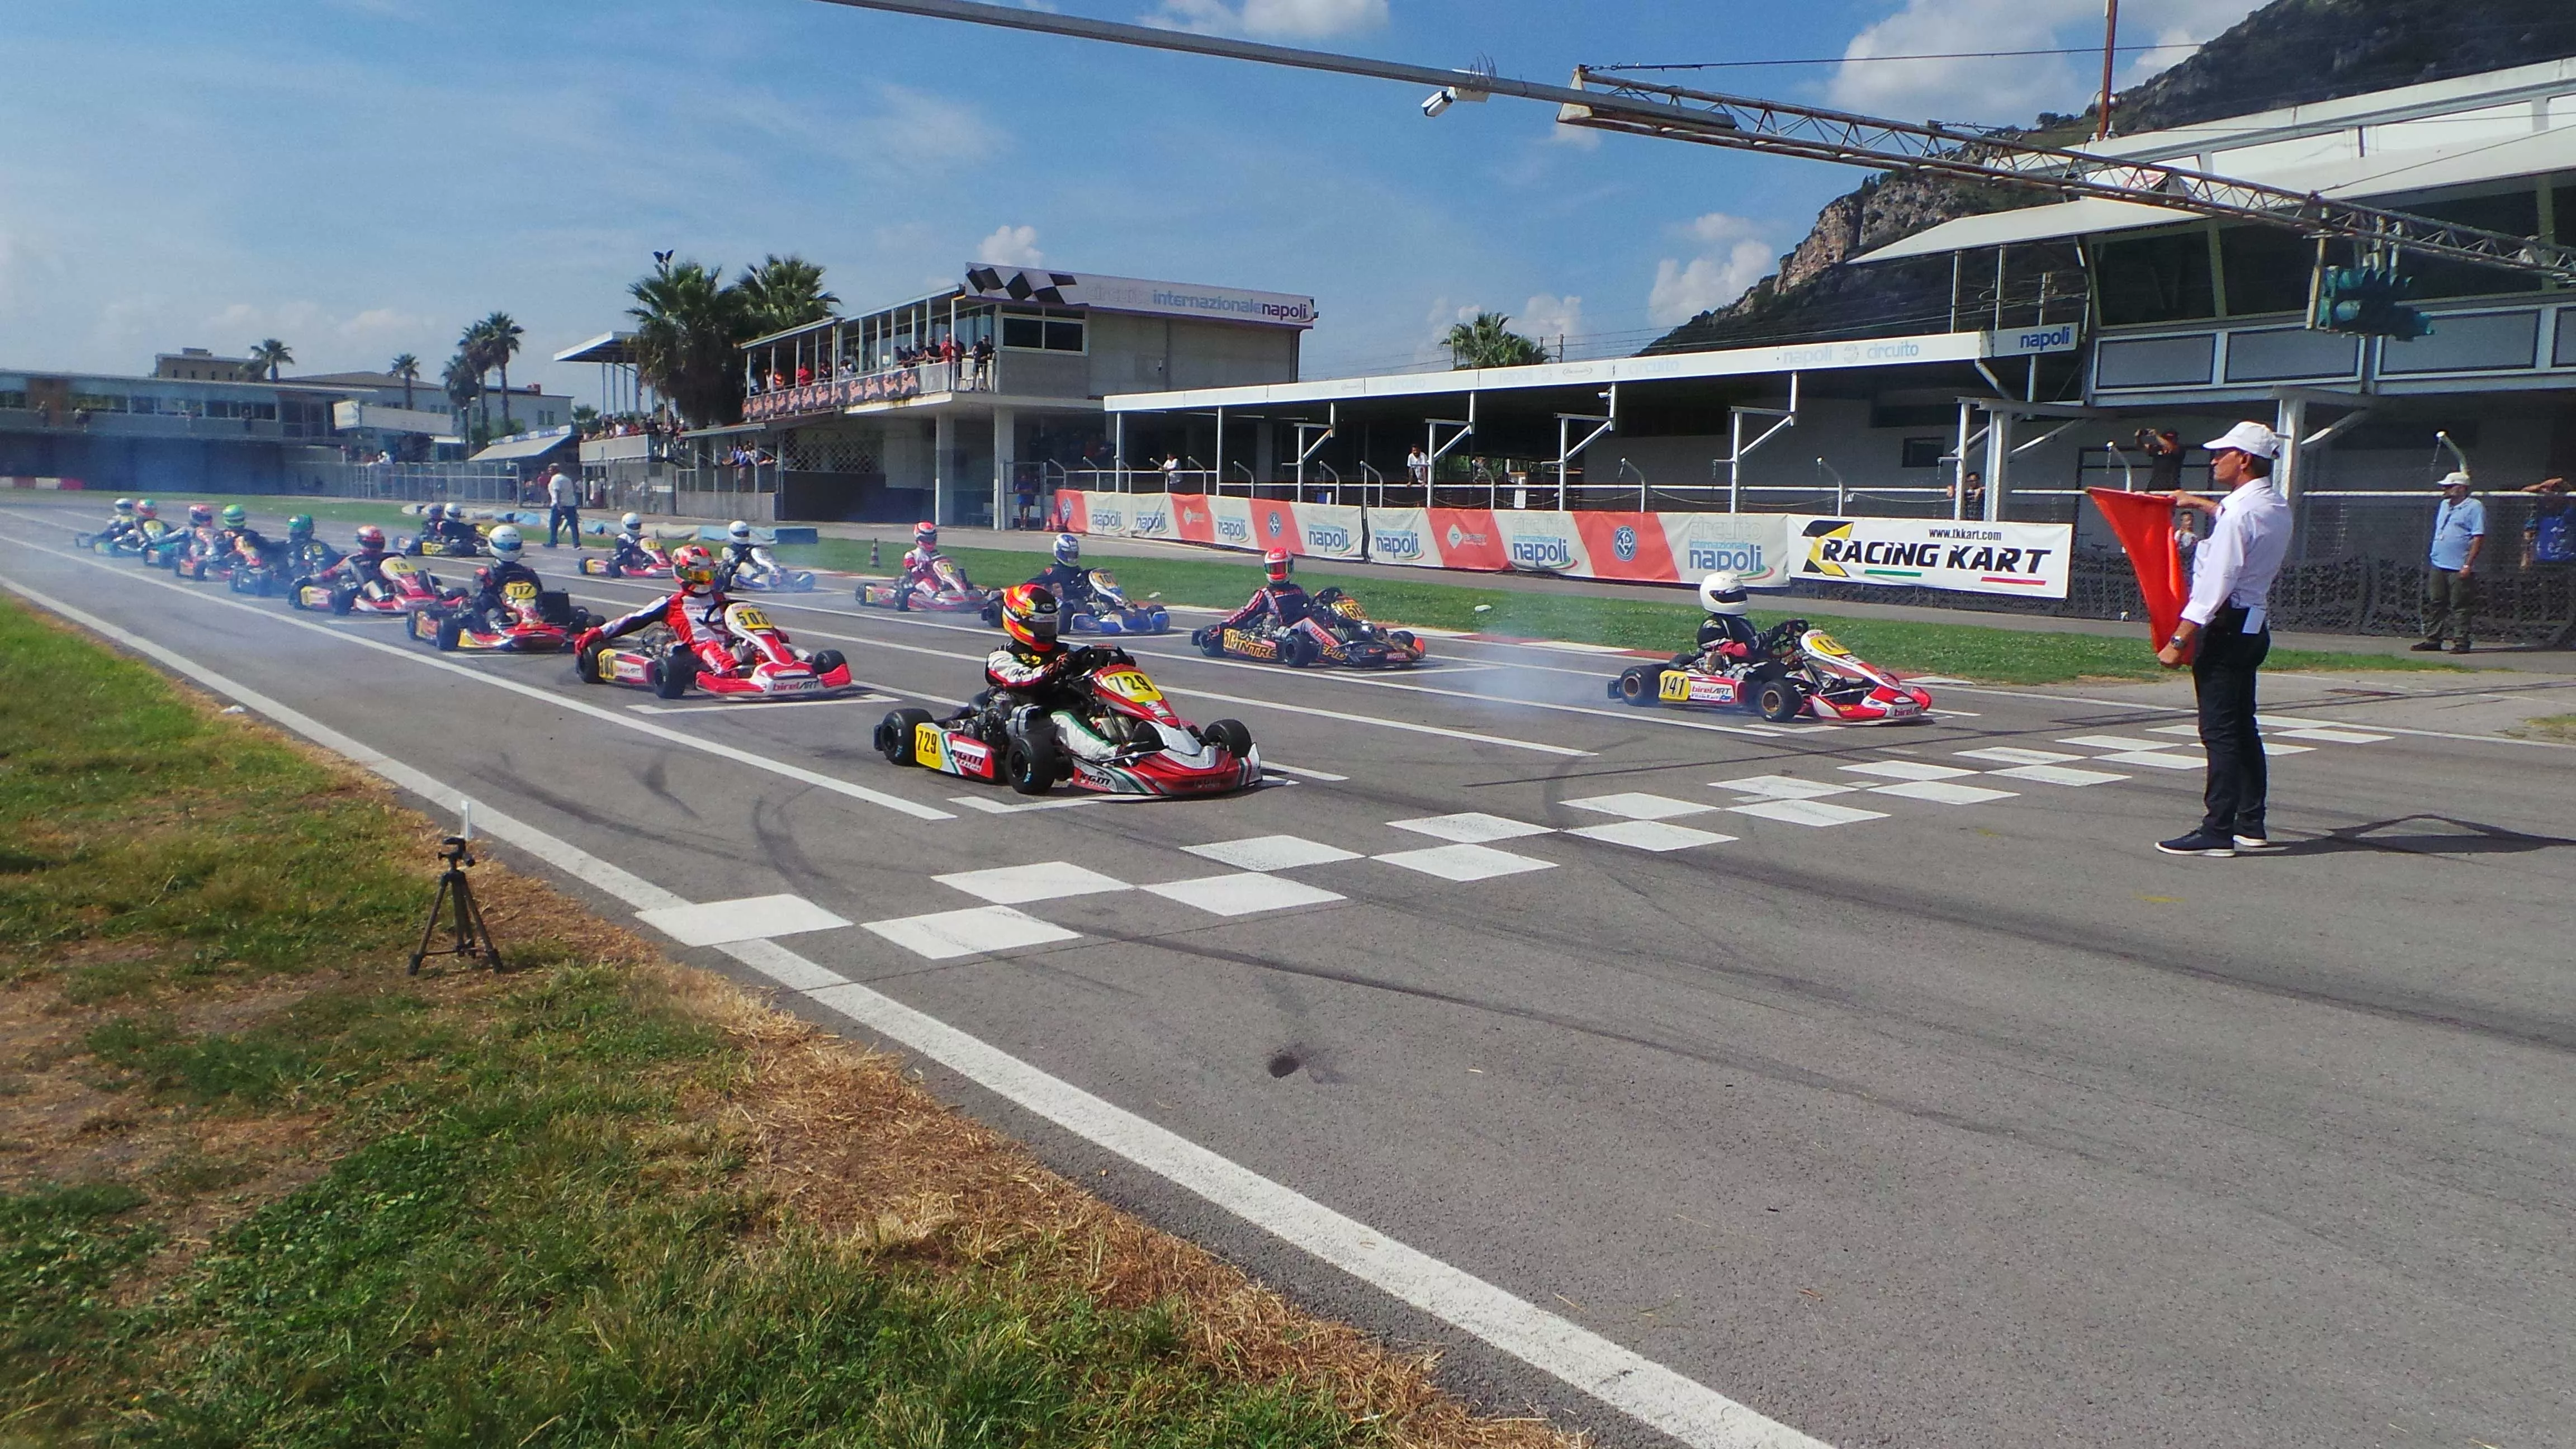 Circuito Internazionale Napoli in Italy, Europe | Karting - Rated 4.1